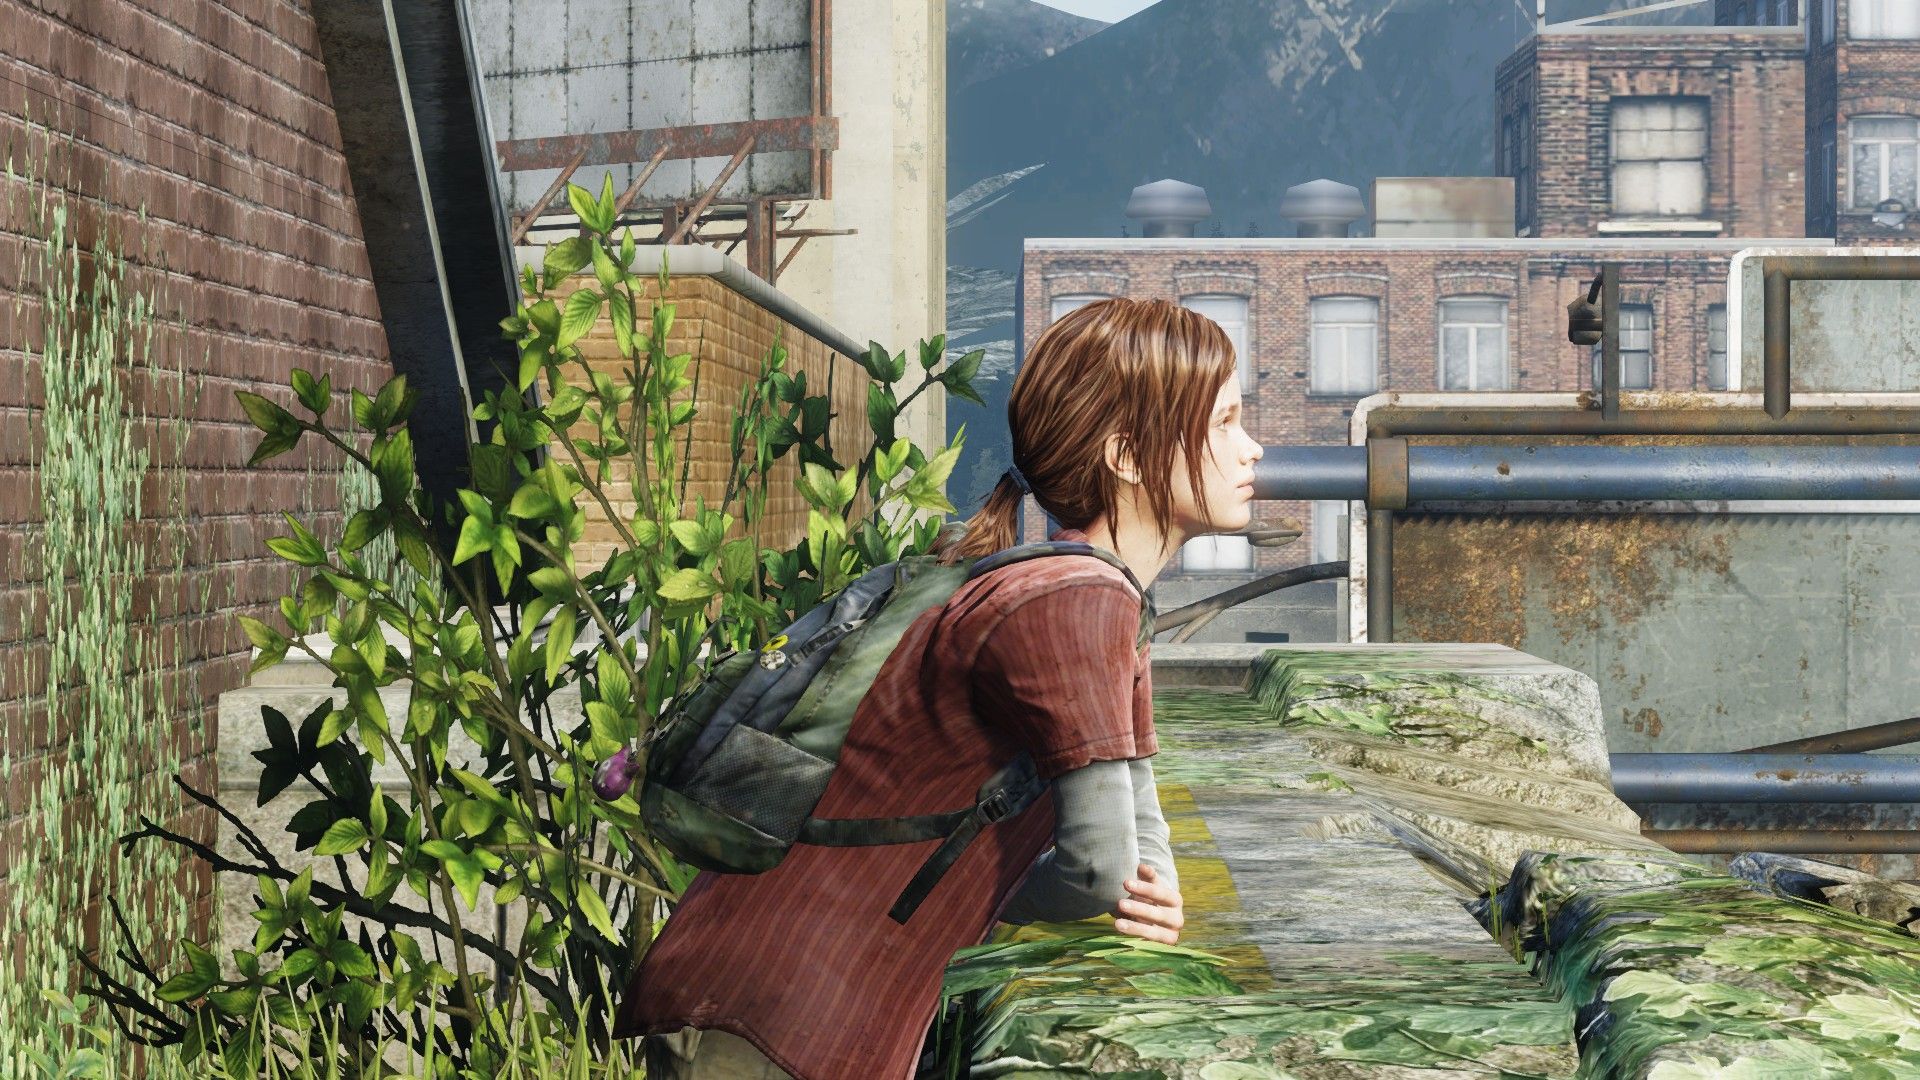 The Last of Us: A Post-Apocalyptic Journey worth remembering